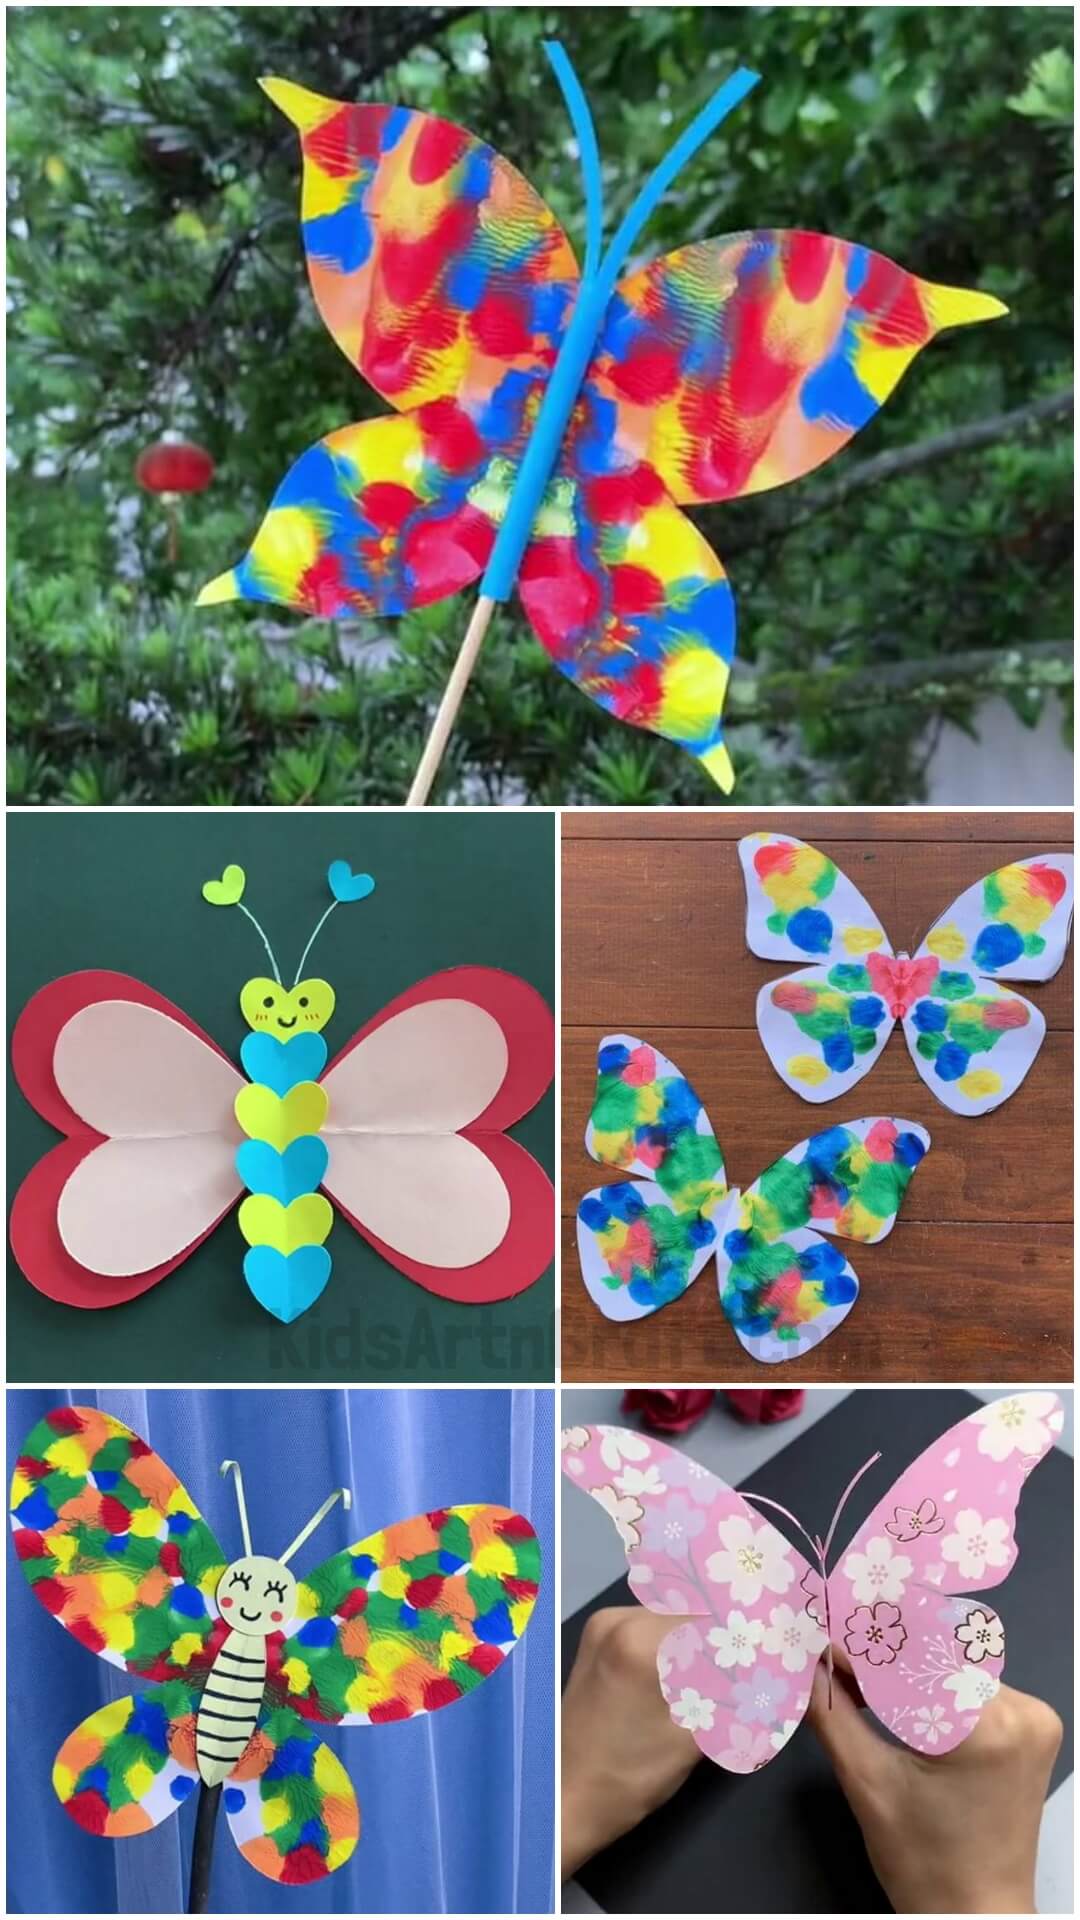 Butterfly Craft Ideas for Kids - Paper Crafts, Drawings & More